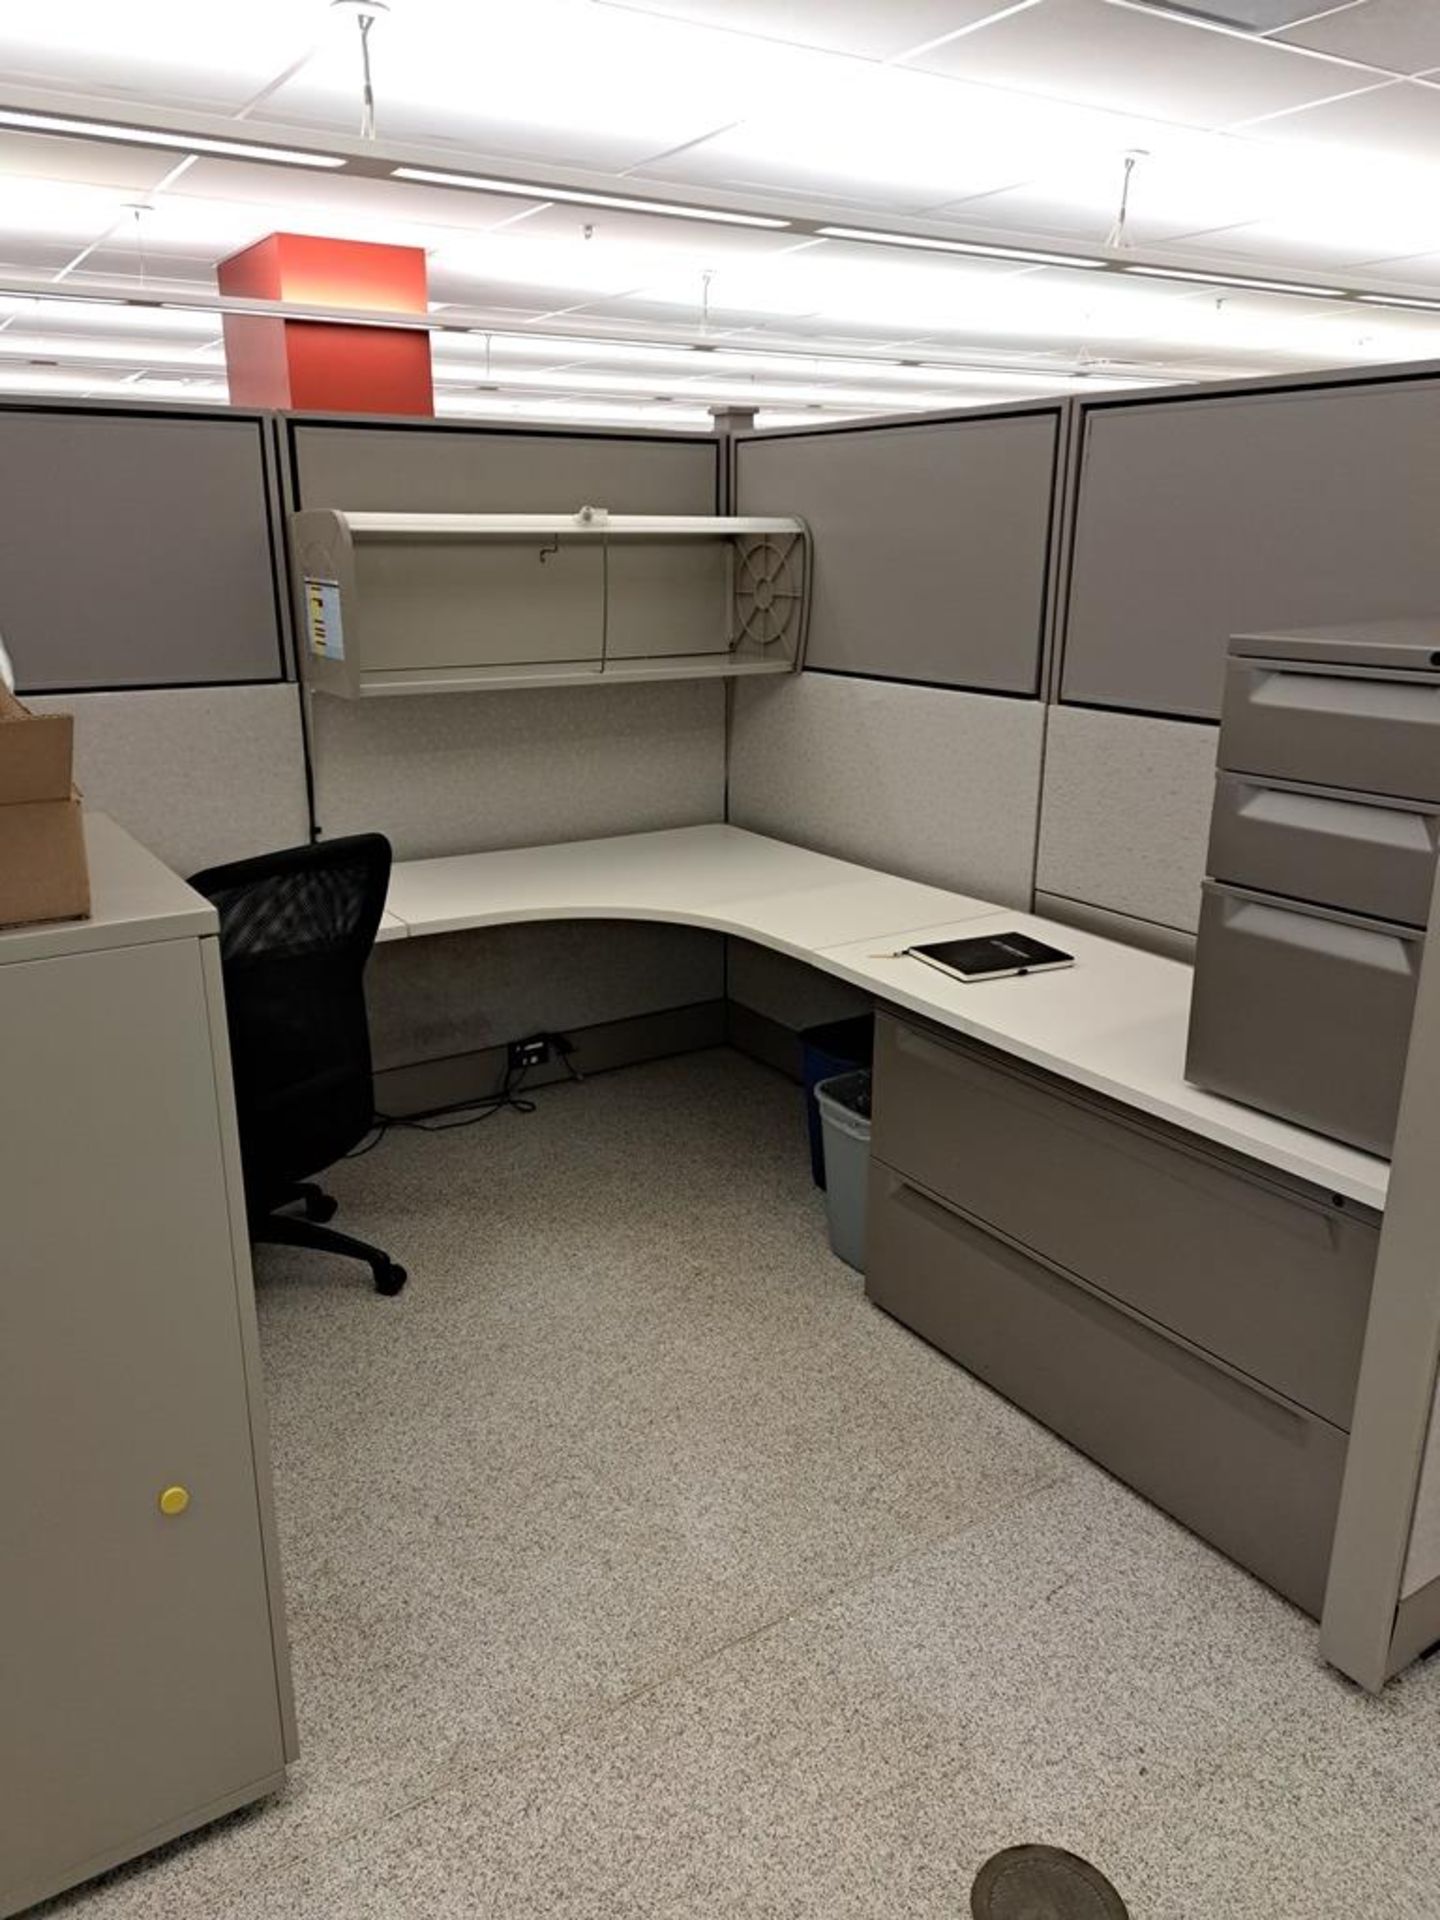 Herman Miller Cubicle Work Stations, 17' W X 50' L, (2) Work Stations per section, (12) Sections, - Image 10 of 25